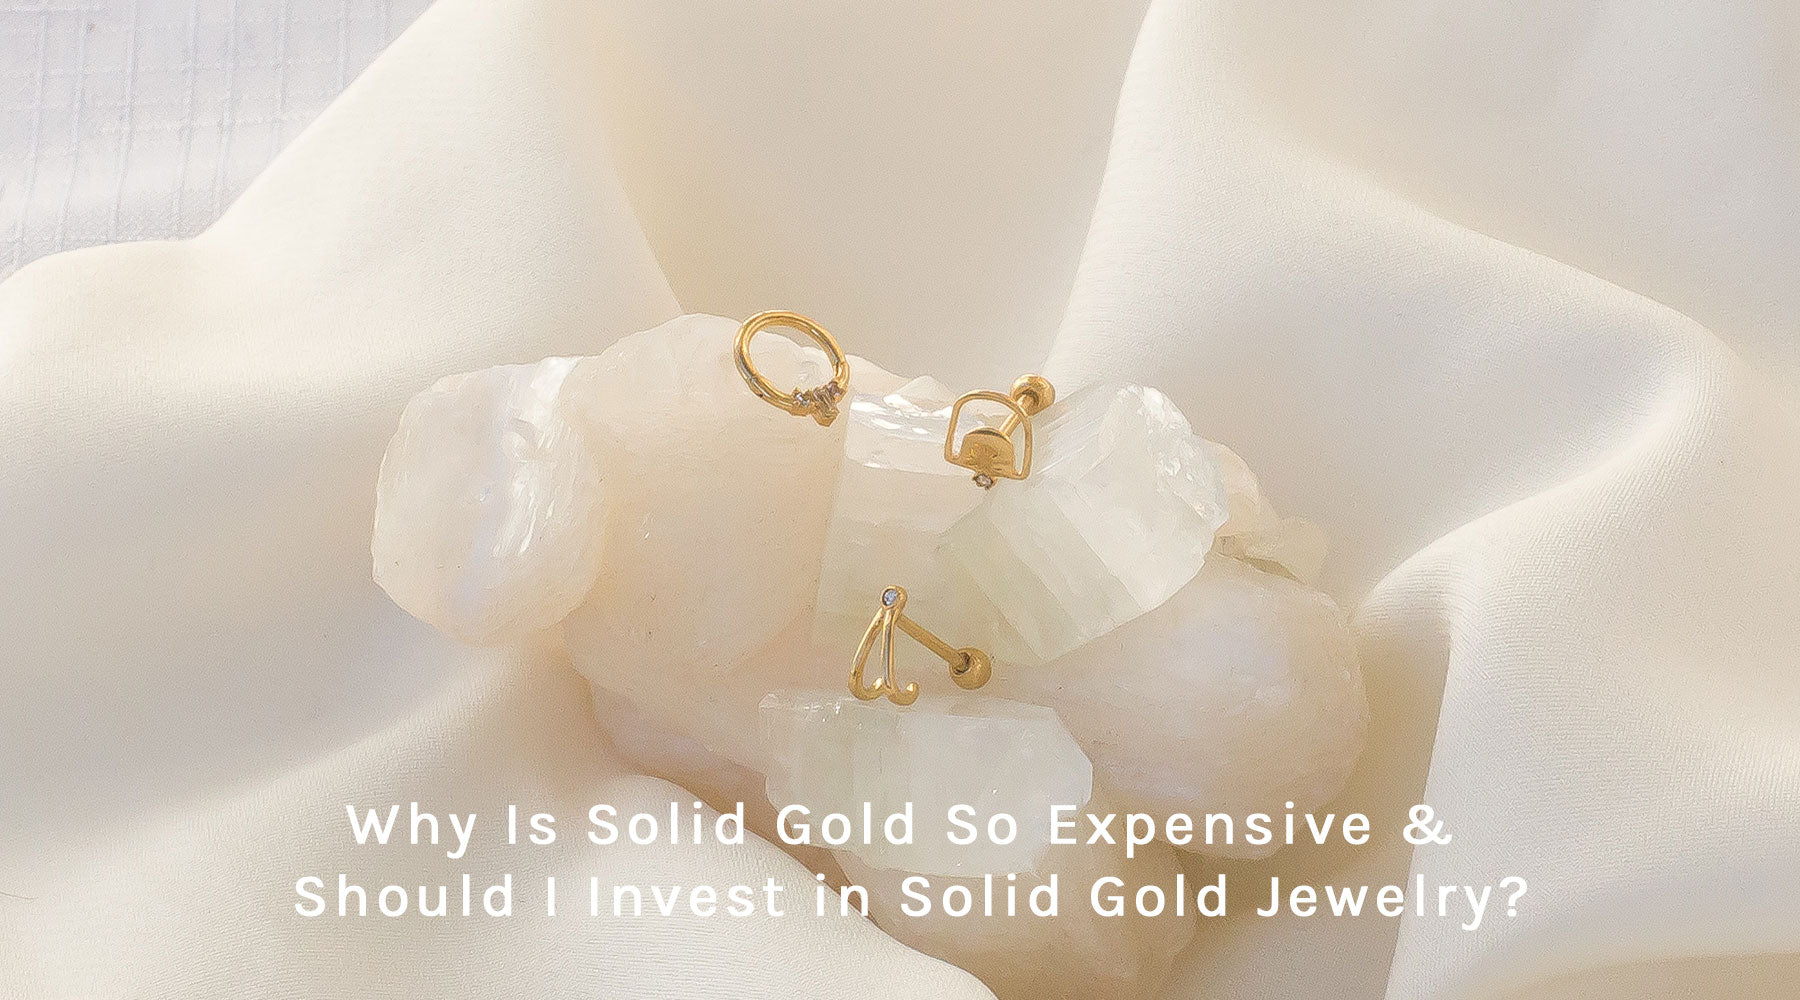 Why Is Solid Gold So Expensive And Should I Invest In Solid Gold Jewelry?